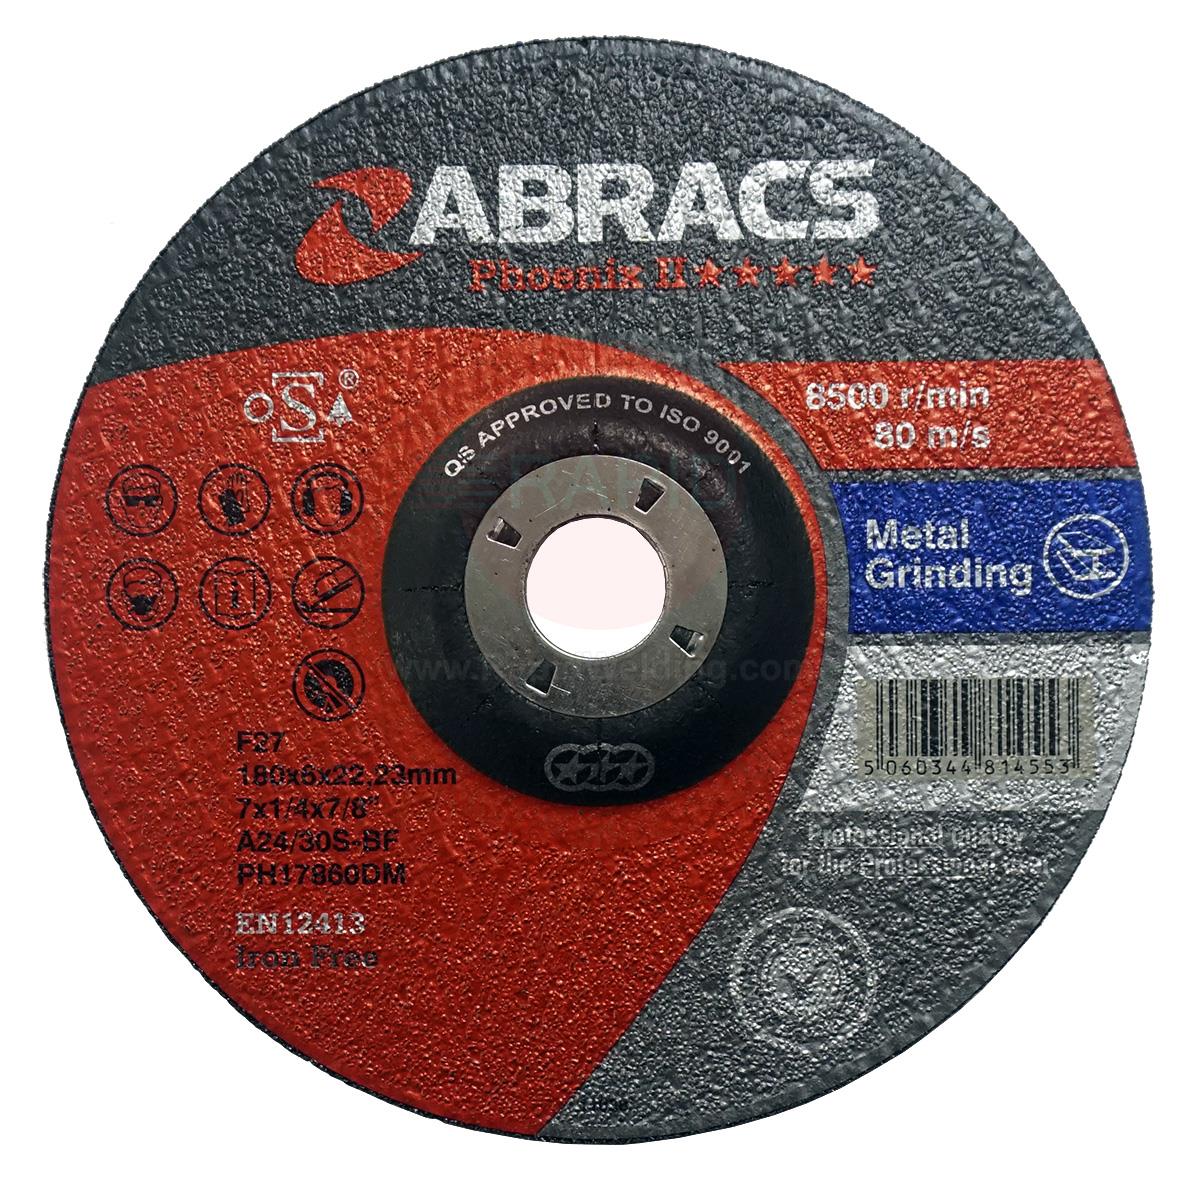 PH17860DM  Abracs Phoenix II 180mm (7) Depressed Centre Grinding Disc 6mm Thick. Grade A24/30S4BF For Steel.